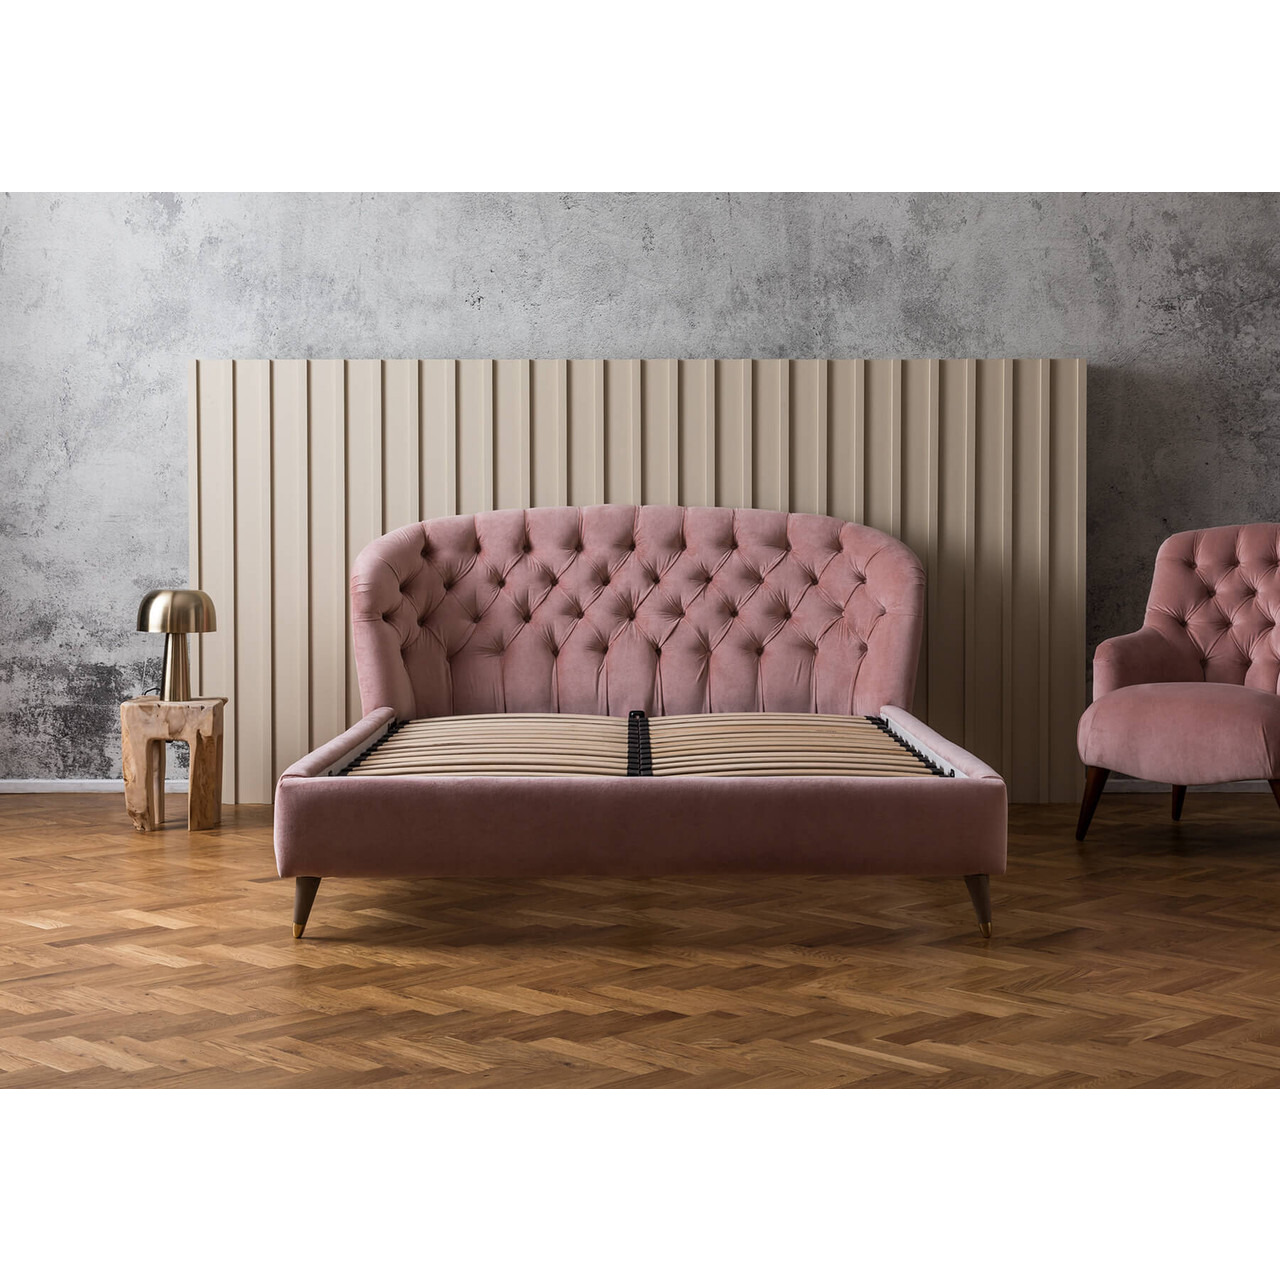 Brook + Wilde Luxury Duchess Super King Size Bed - Premium Stylish Bed with Customisable Design